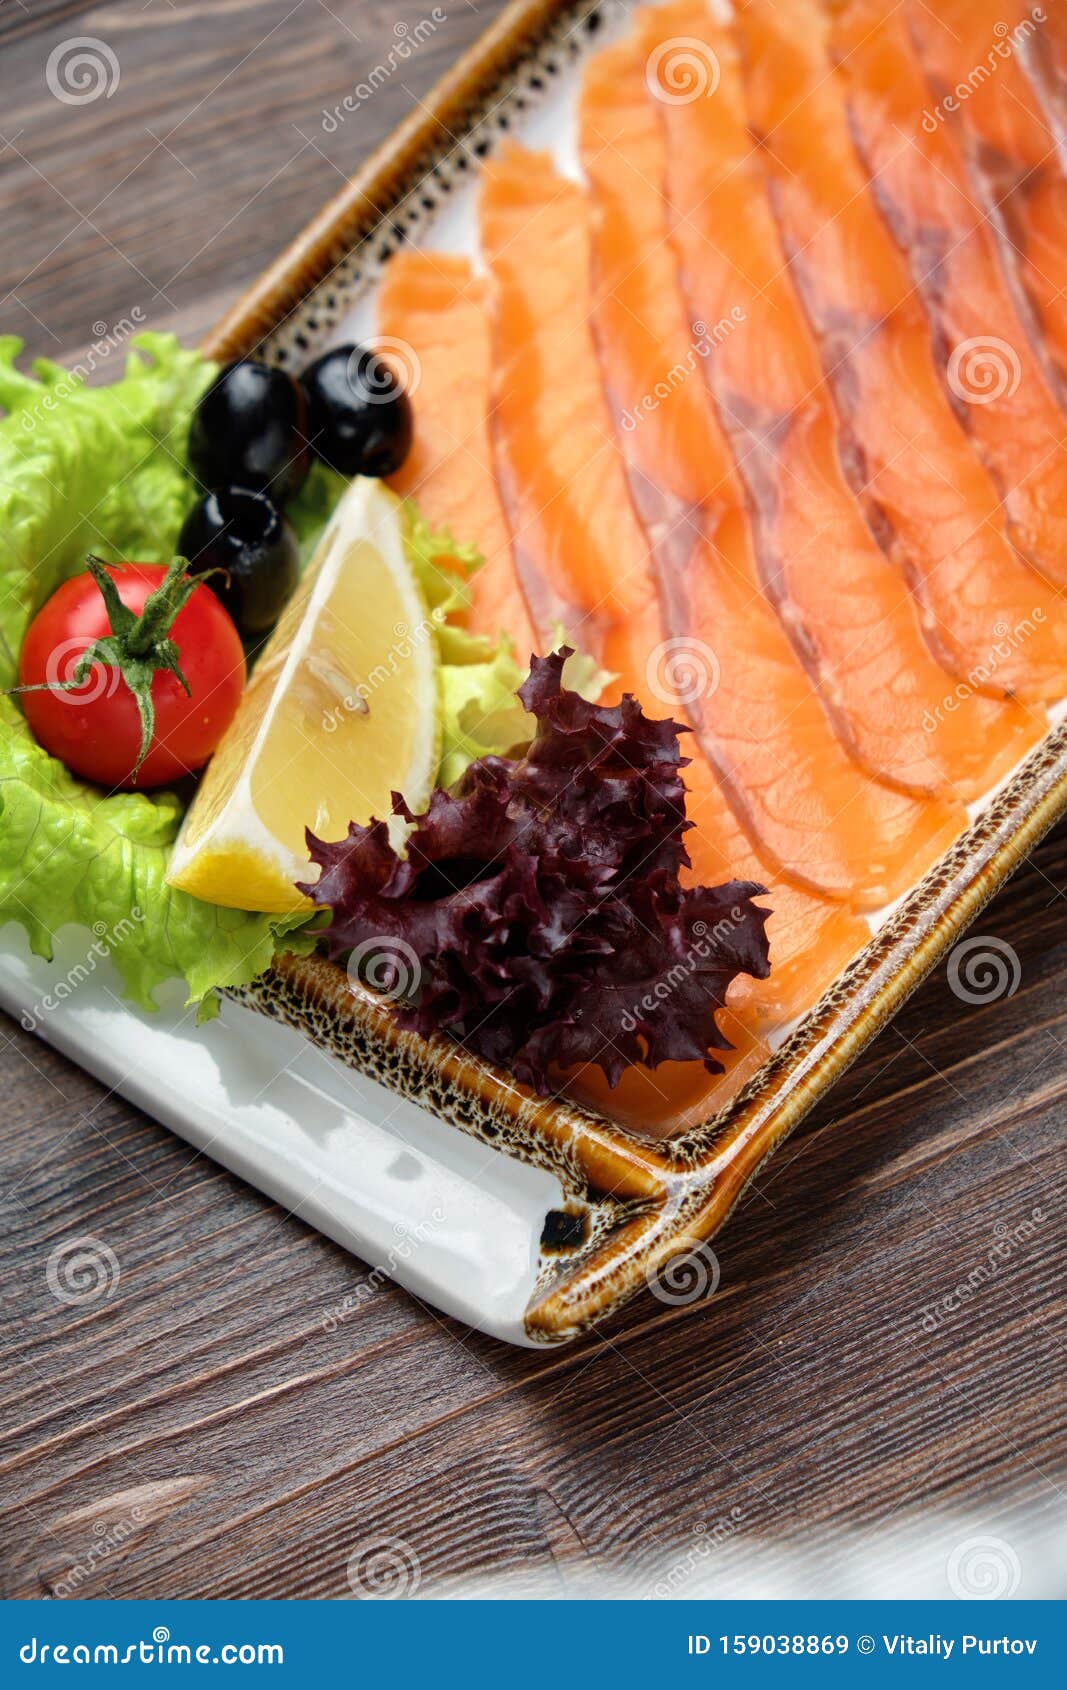 Red Trout Fish Sliced. Restaurant Menu Stock Image Image